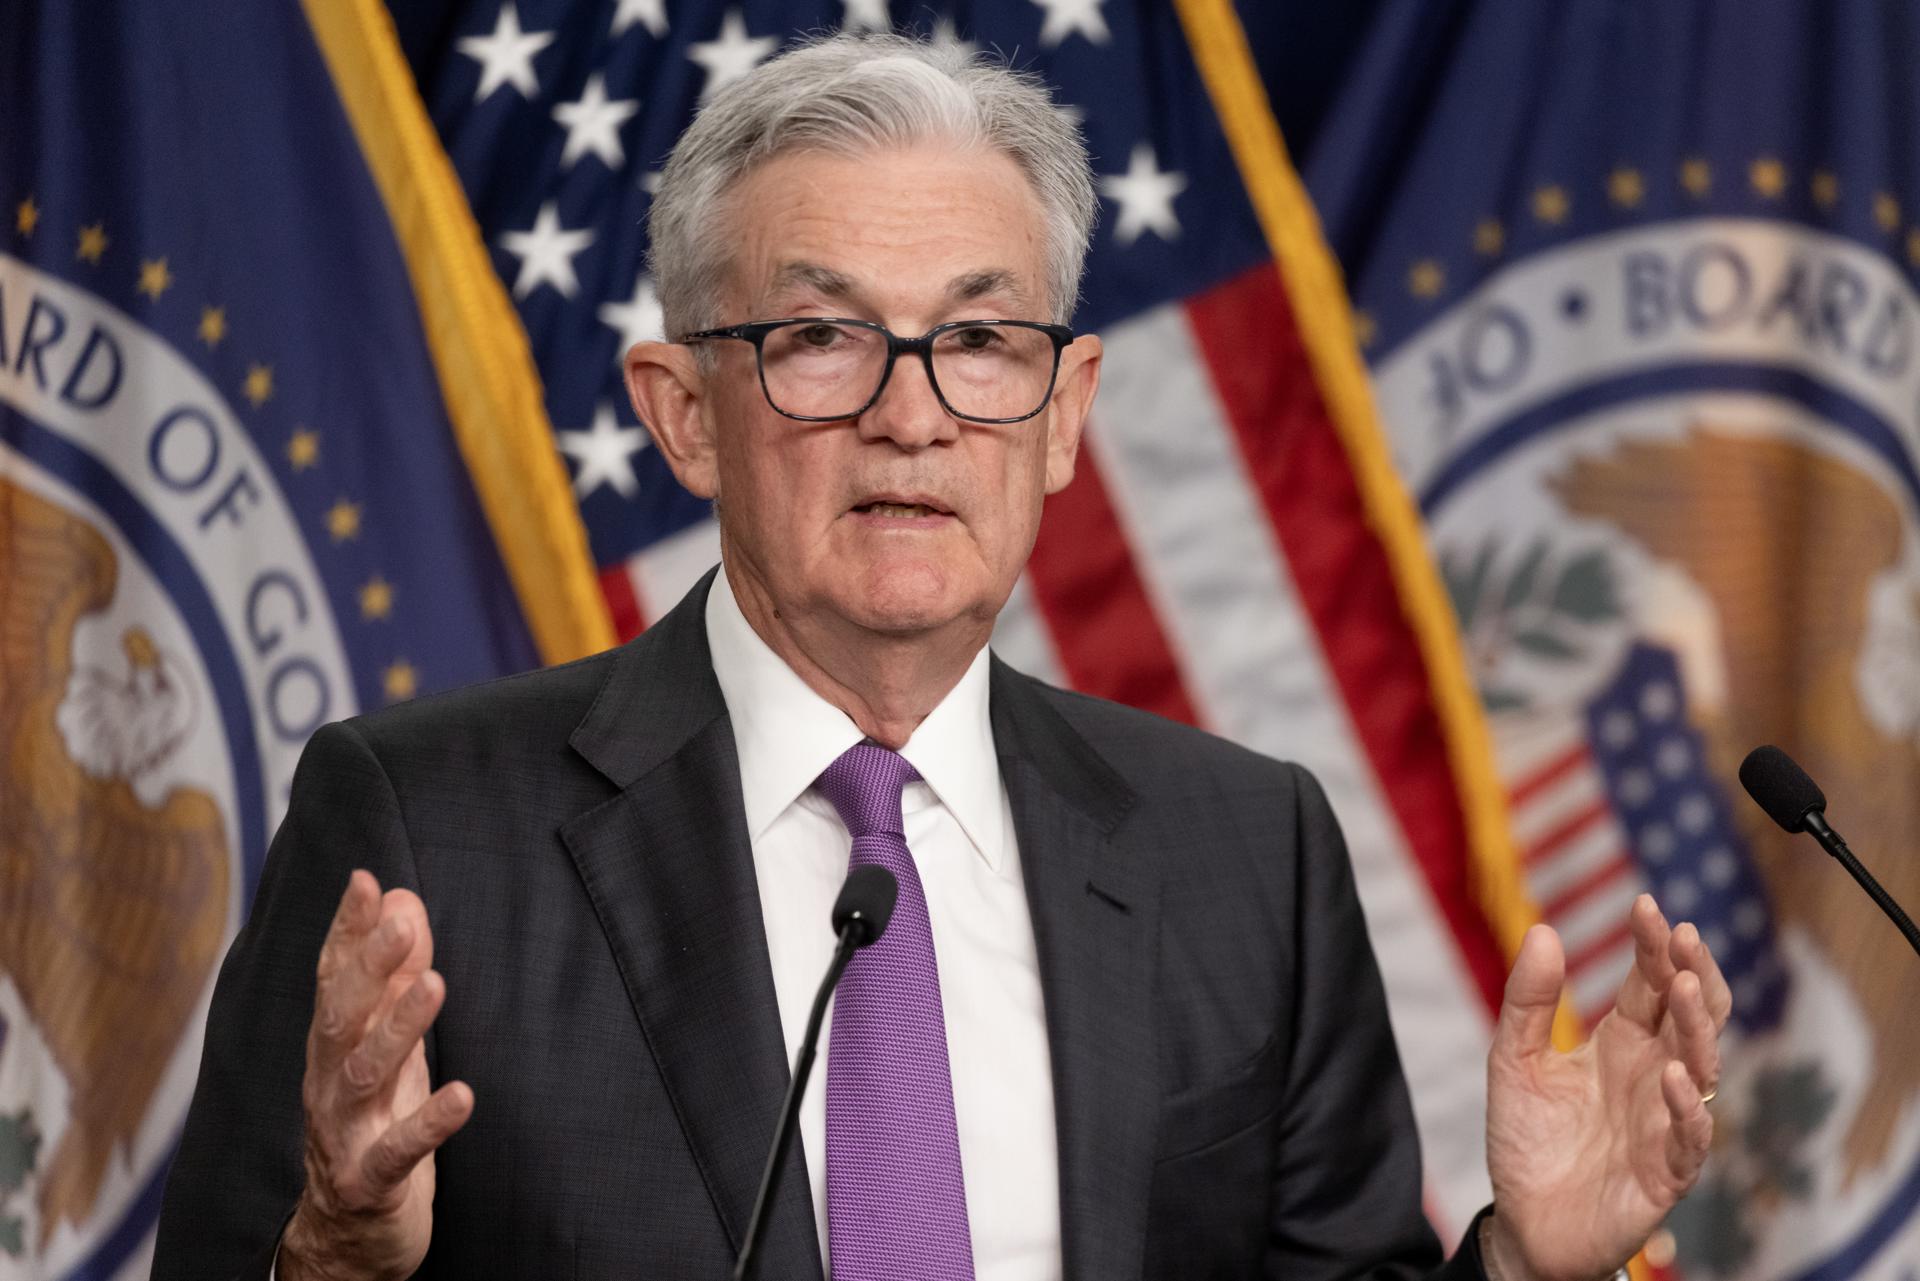 The US Federal Reserve raised its benchmark interest rate by a quarter-point on Wednesday, a move that comes after the central bank decided to pause its monetary tightening in June. EFE/EPA/MICHAEL REYNOLDS